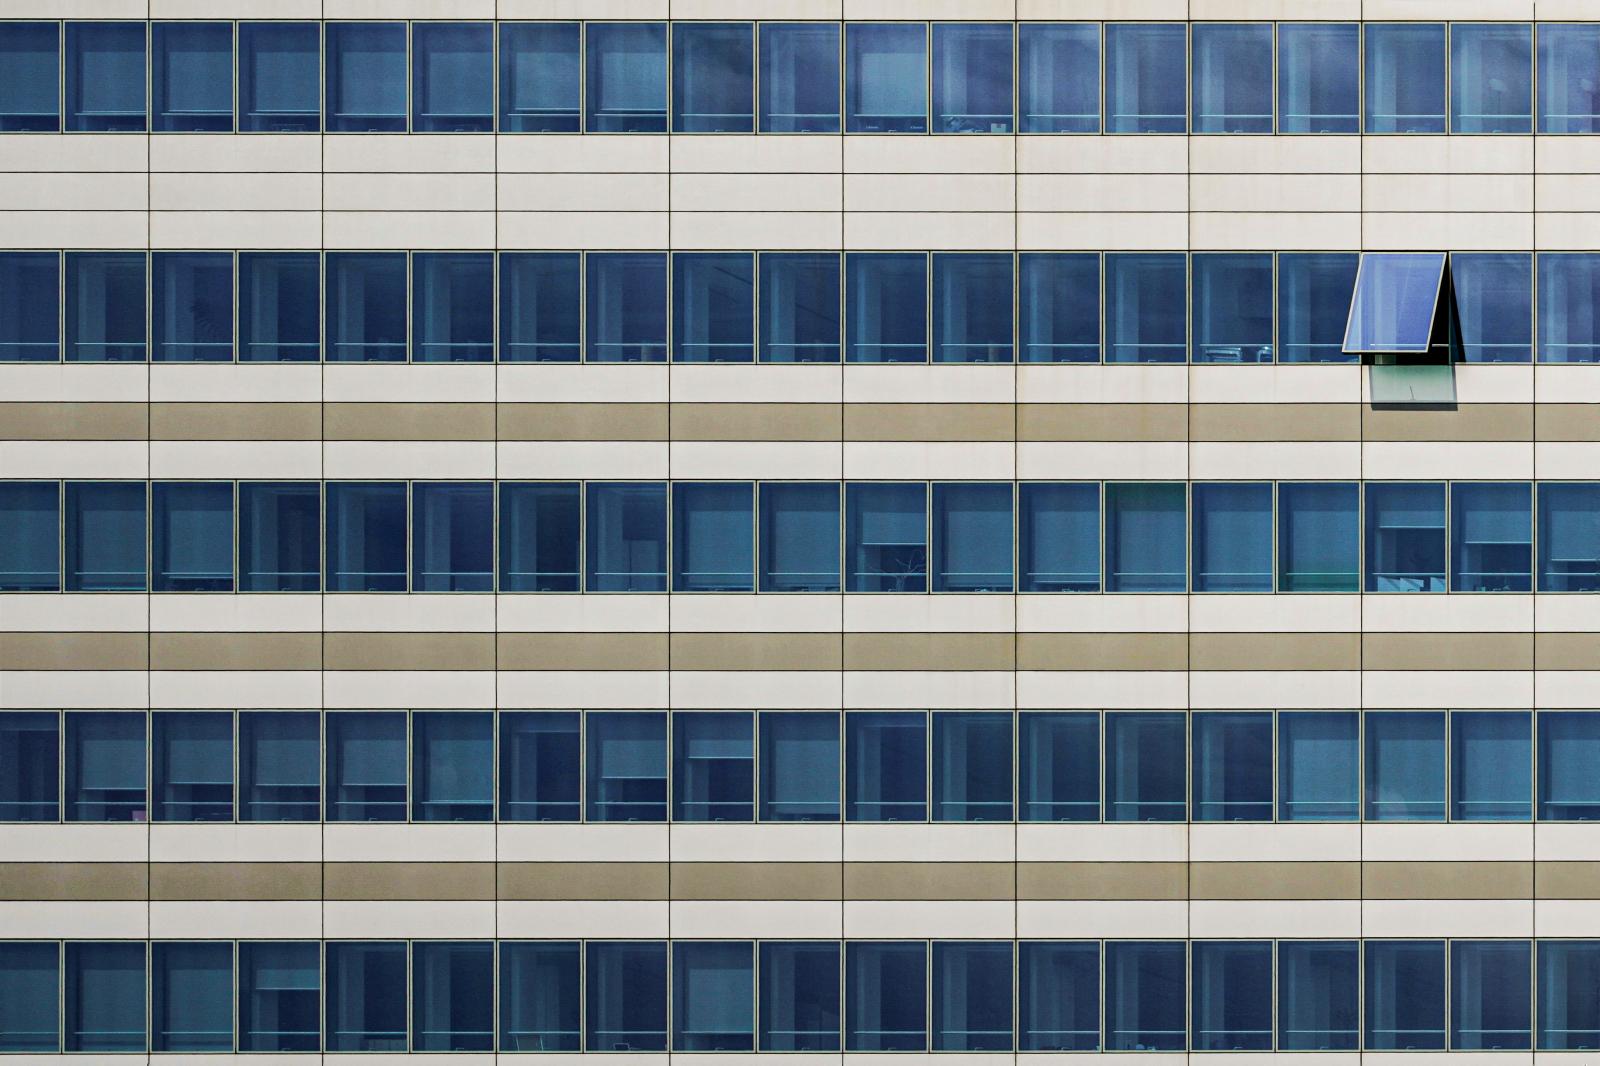 New Photographs in 2023 -  Milan, Italy  # 3929 5/2023 An open window in the facade...